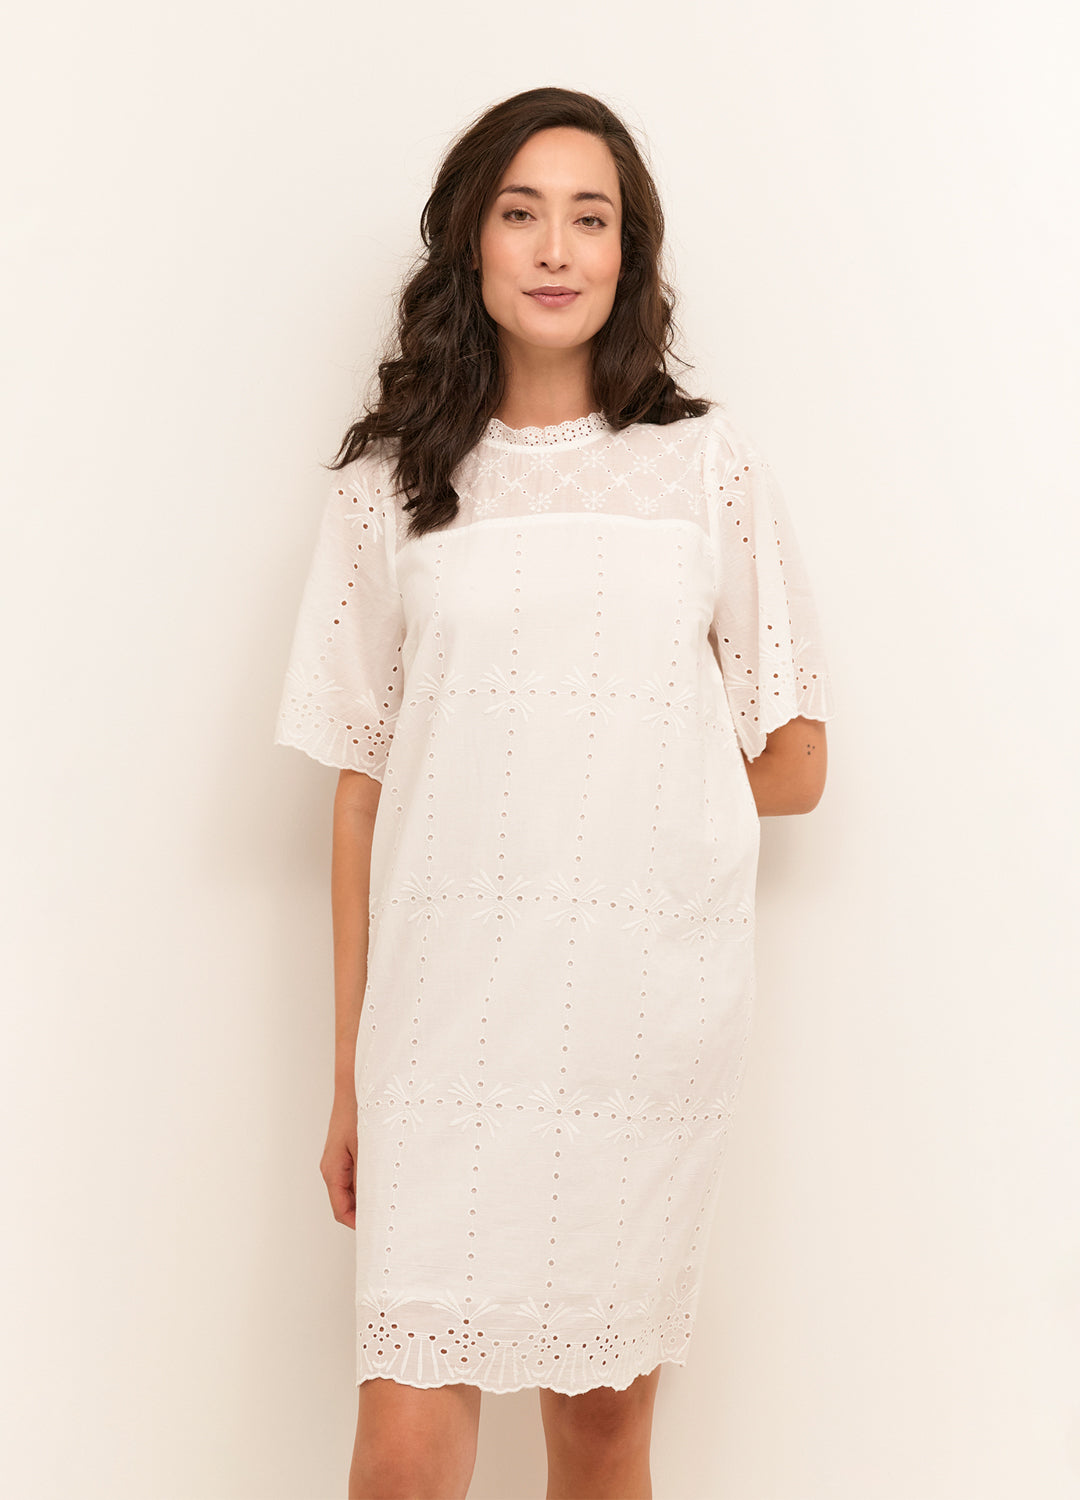 Front view of the Cream Clothing Denmark Moccamia Dress in Snow White cotton with eyelet detailing at Inner Beach Co, Toronto, Ontario, Canada